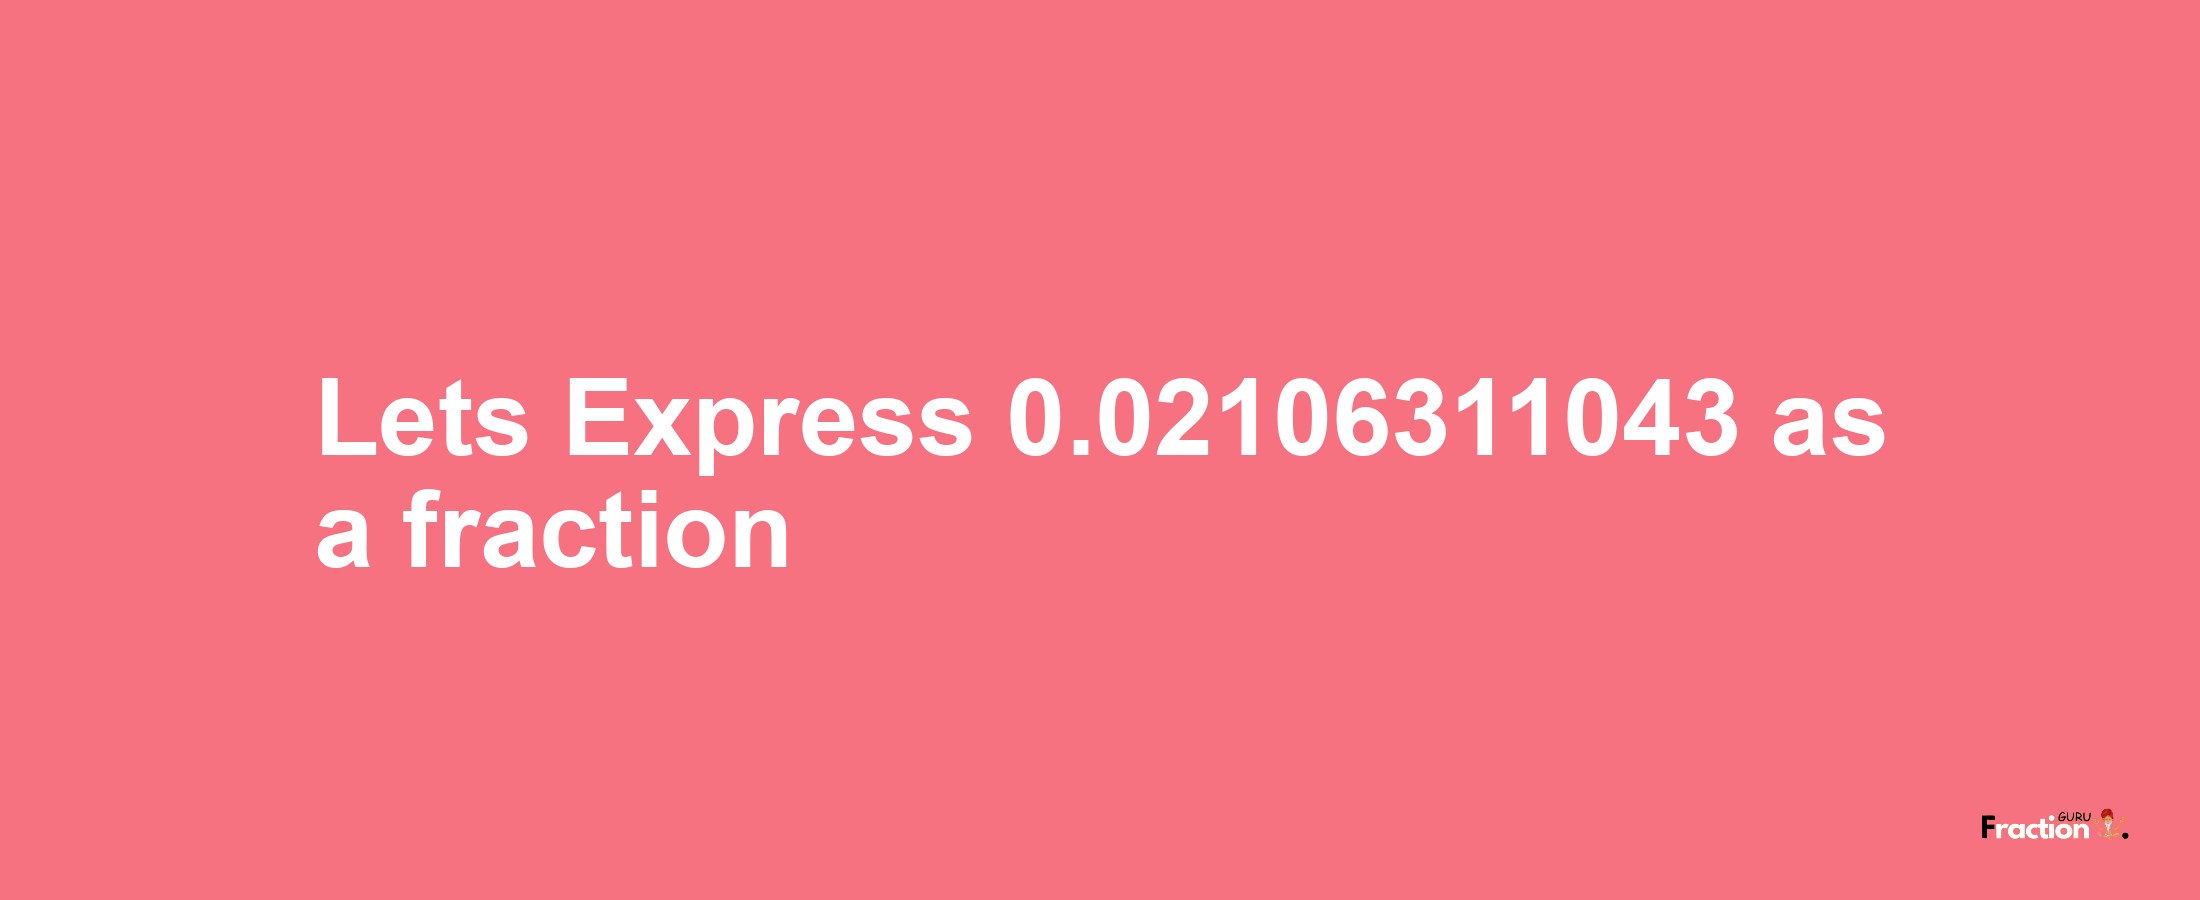 Lets Express 0.02106311043 as afraction